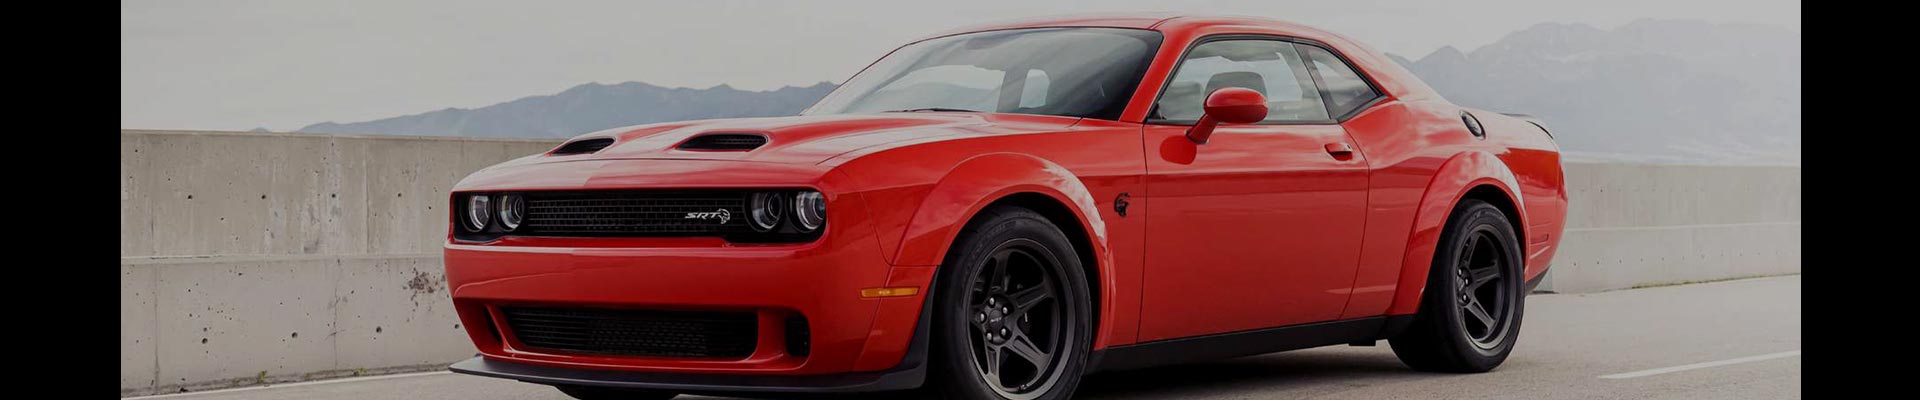 Shop Replacement and OEM 2016 Dodge Challenger Parts with Discounted Price on the Net